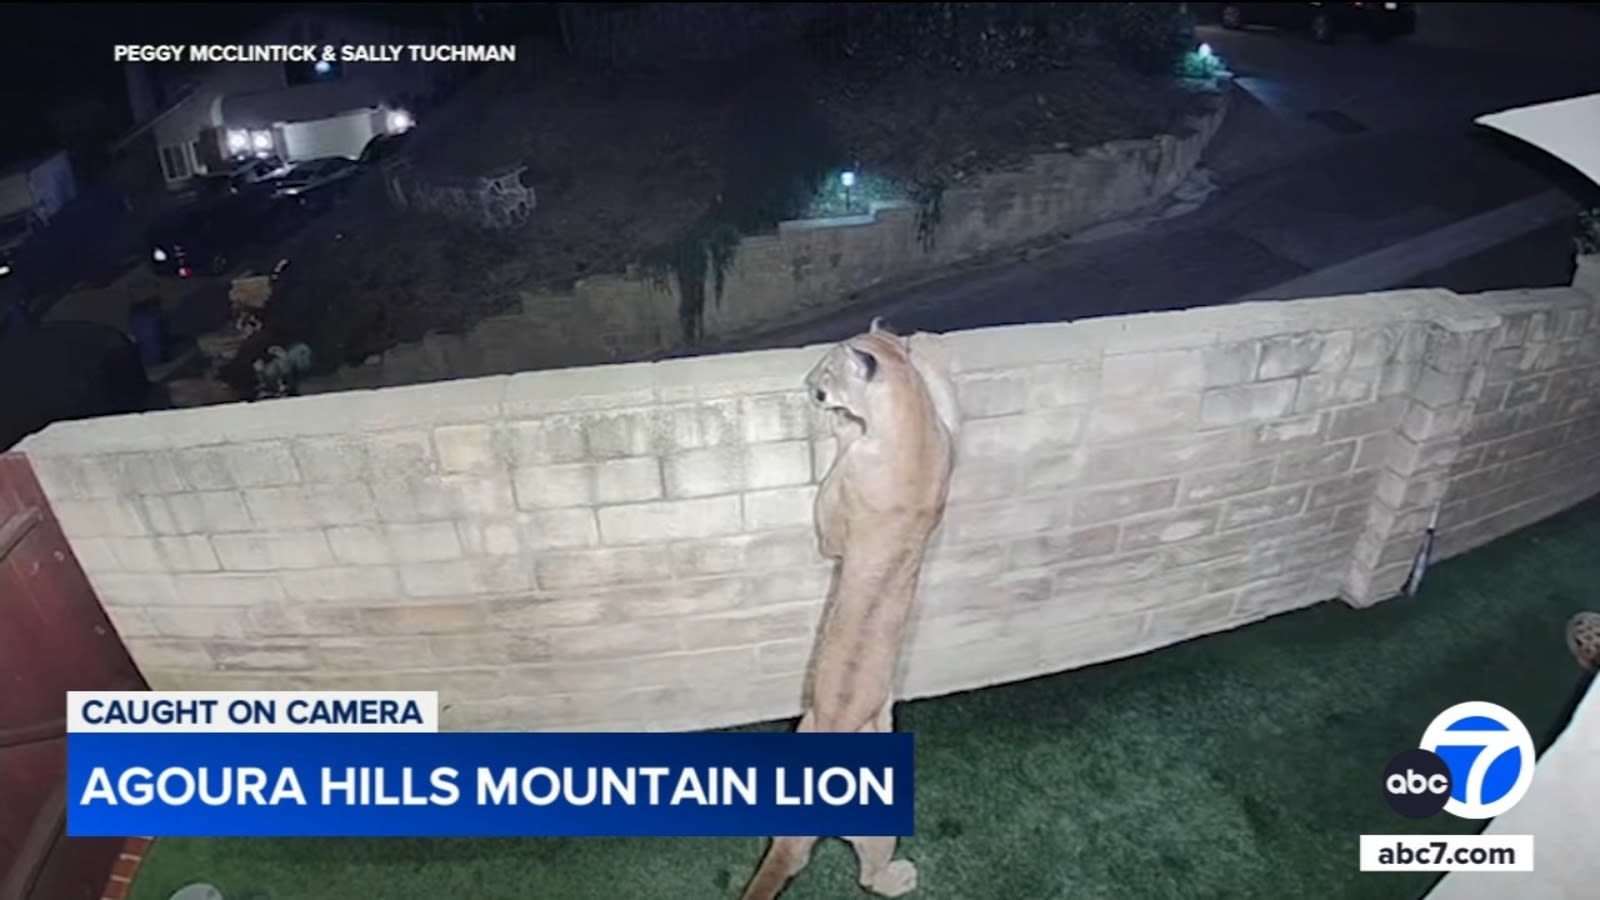 Mountain lion in backyard makes beautiful, frightening sight for Agoura Hills couple